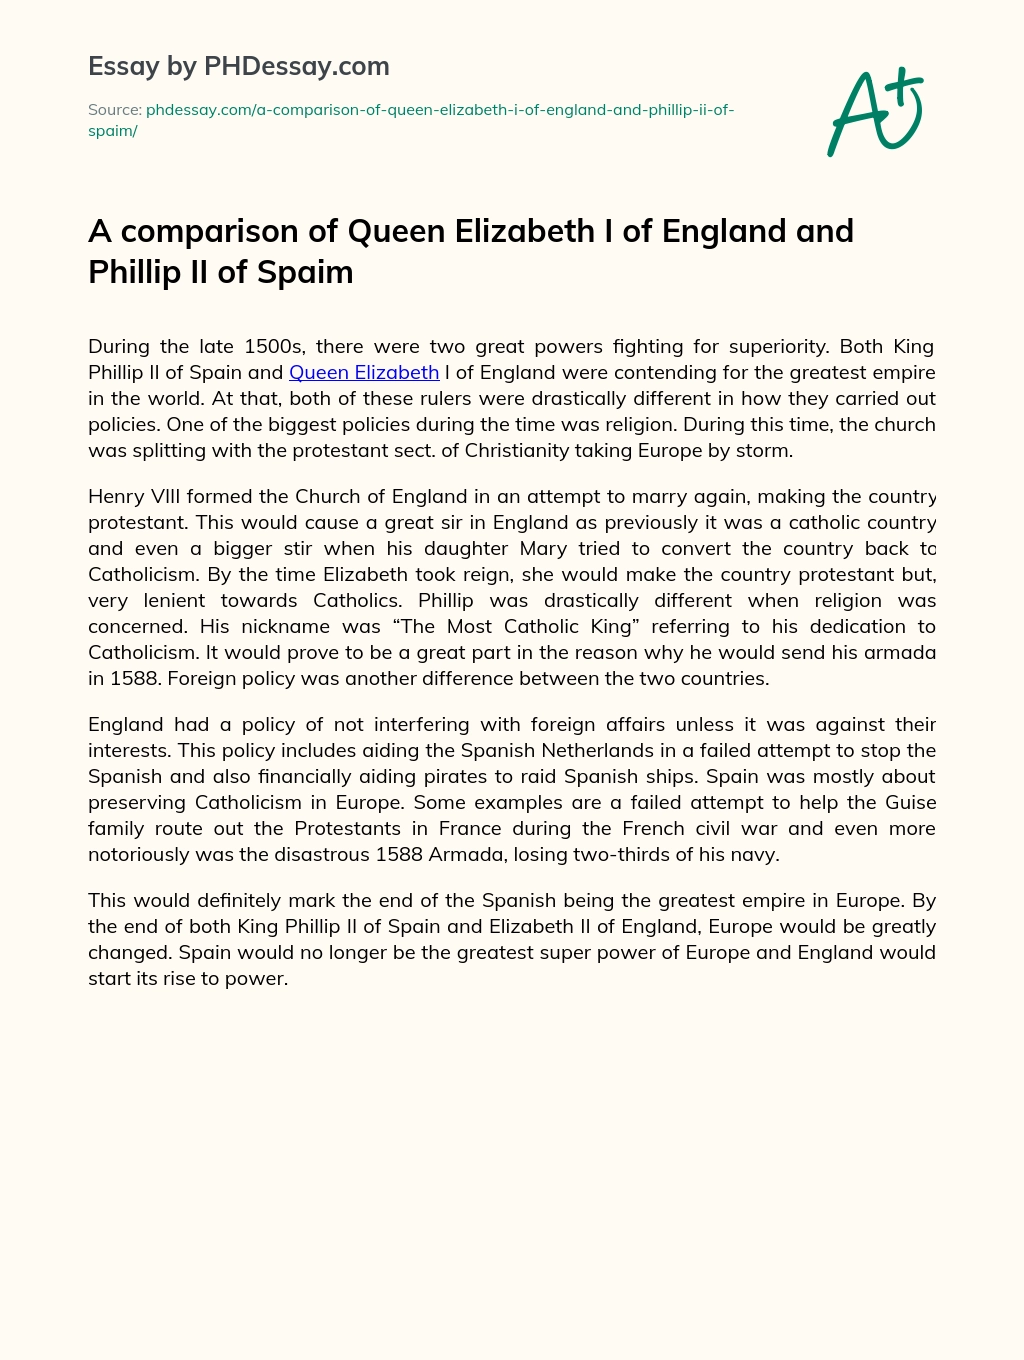 A comparison of Queen Elizabeth I of England and Phillip II of Spaim essay